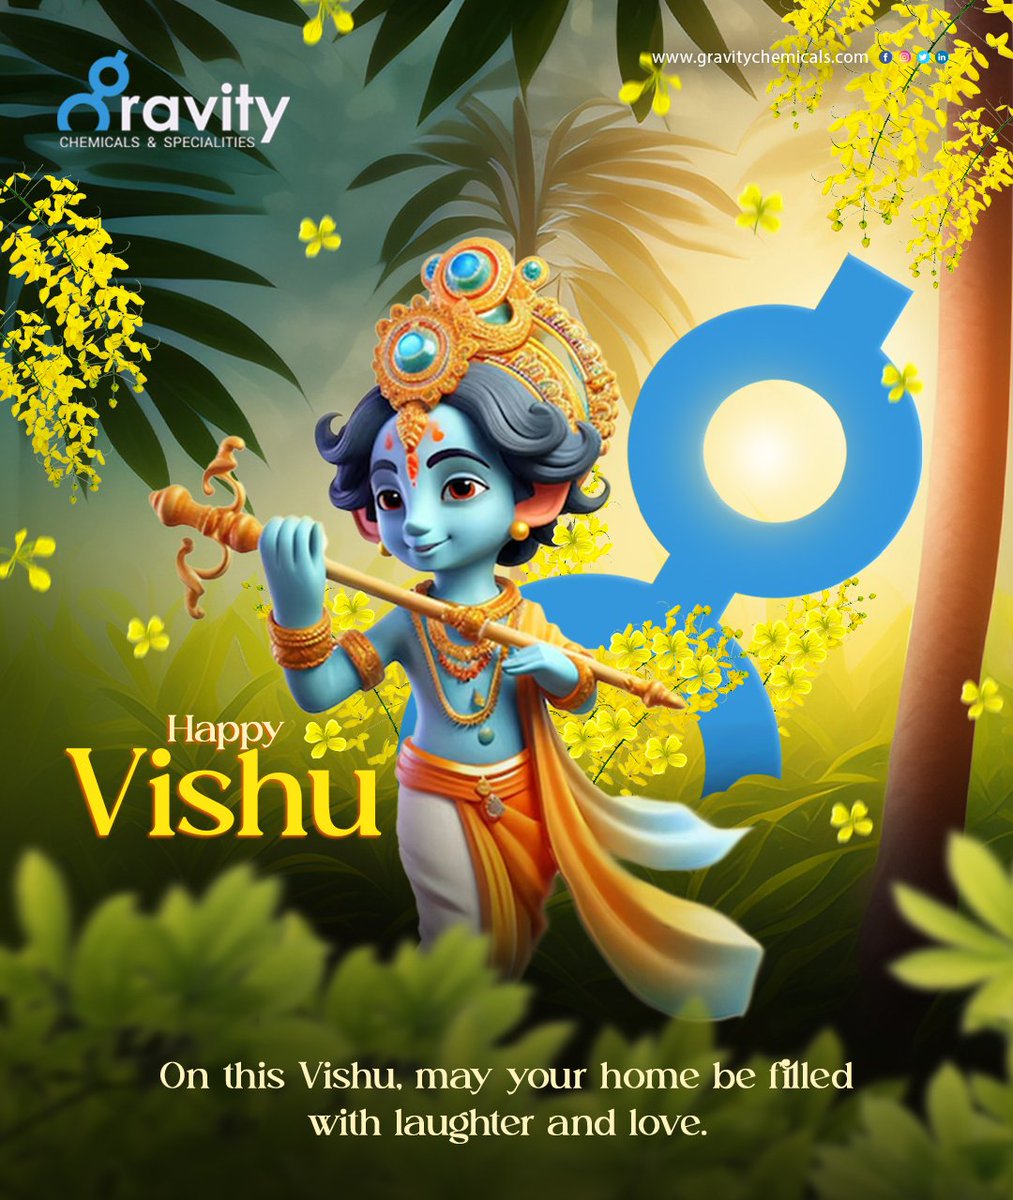 On this Vishu, may your home be filled with laughter and love.

Happy Vishu
.
gravitychemicals.com

#gravitychemicals #happyvishu #vishu #vishuspecial #vishukani #india #Kerala #mallu #instagood #love #festival #traditionalwear #vishusadhya #traditional #krishna